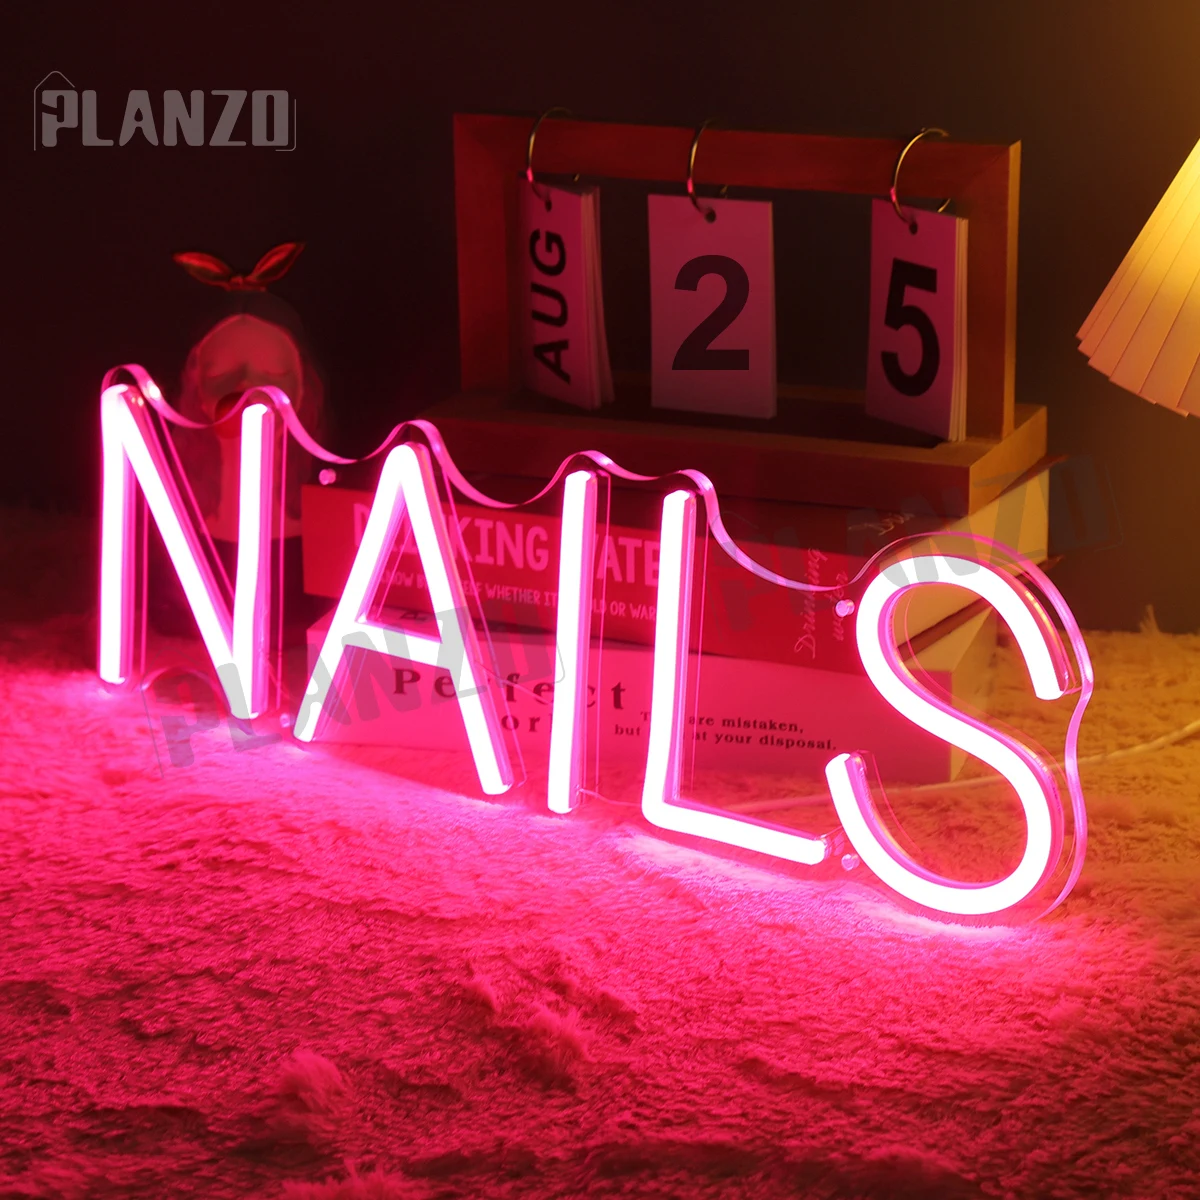 

Neon led sign Pink NAILS Spa Beauty Salon Studio Art Room Decor Sign for Haircut Hello Gorgeous Welcome Wall Decoration Front